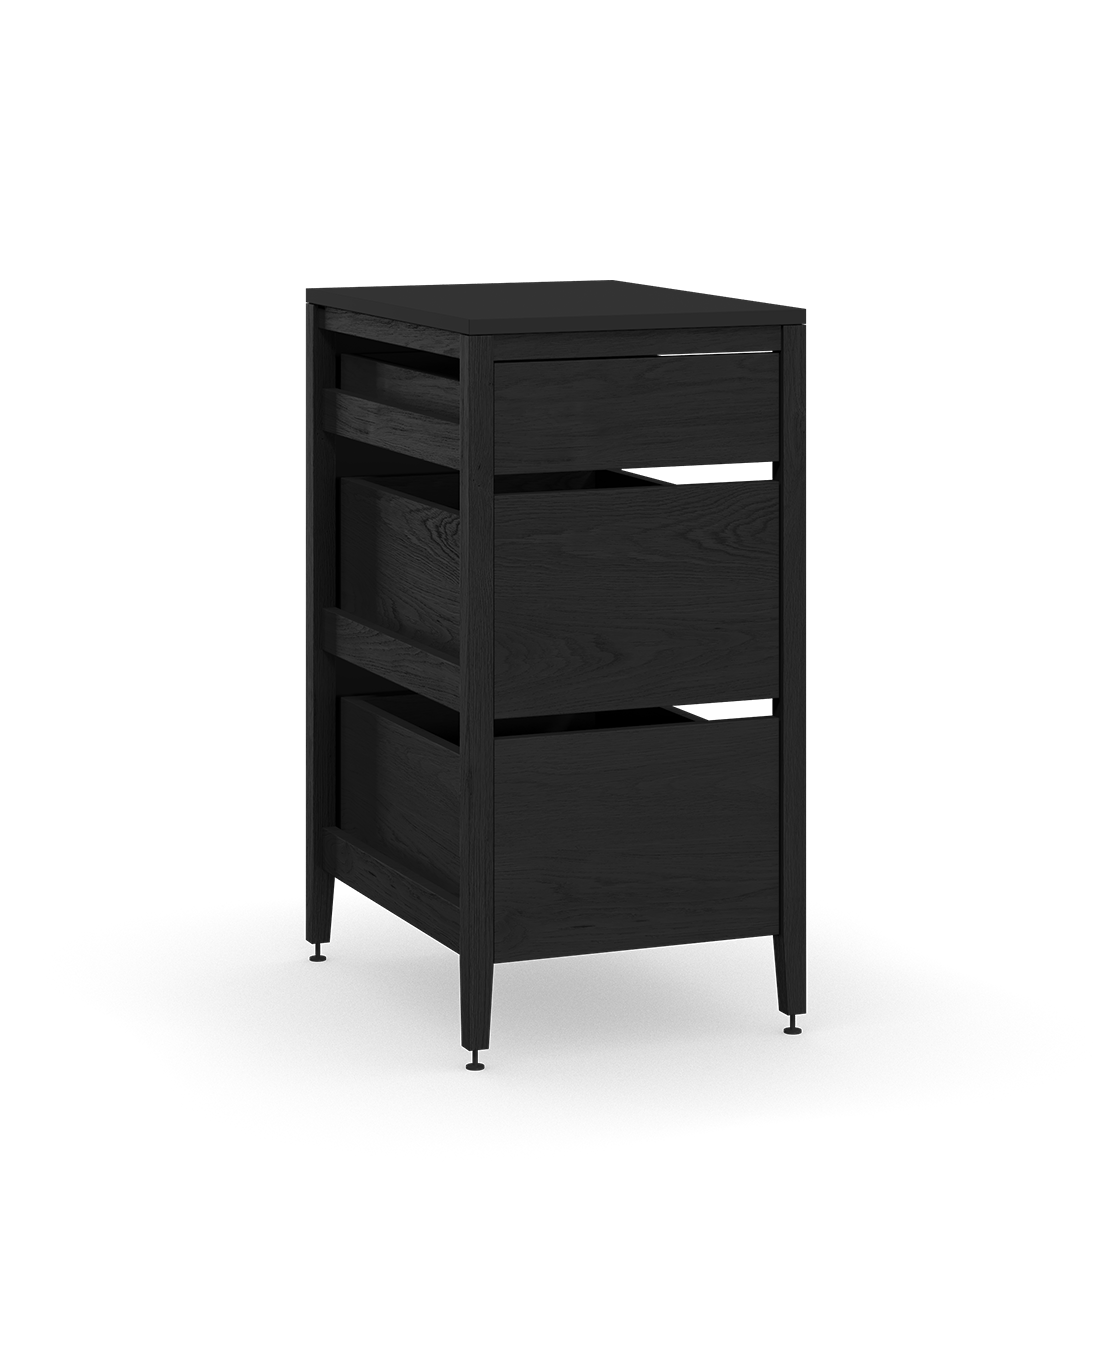 Coquo modular kitchen cabinet with 3 wood drawers in black stained oak. 